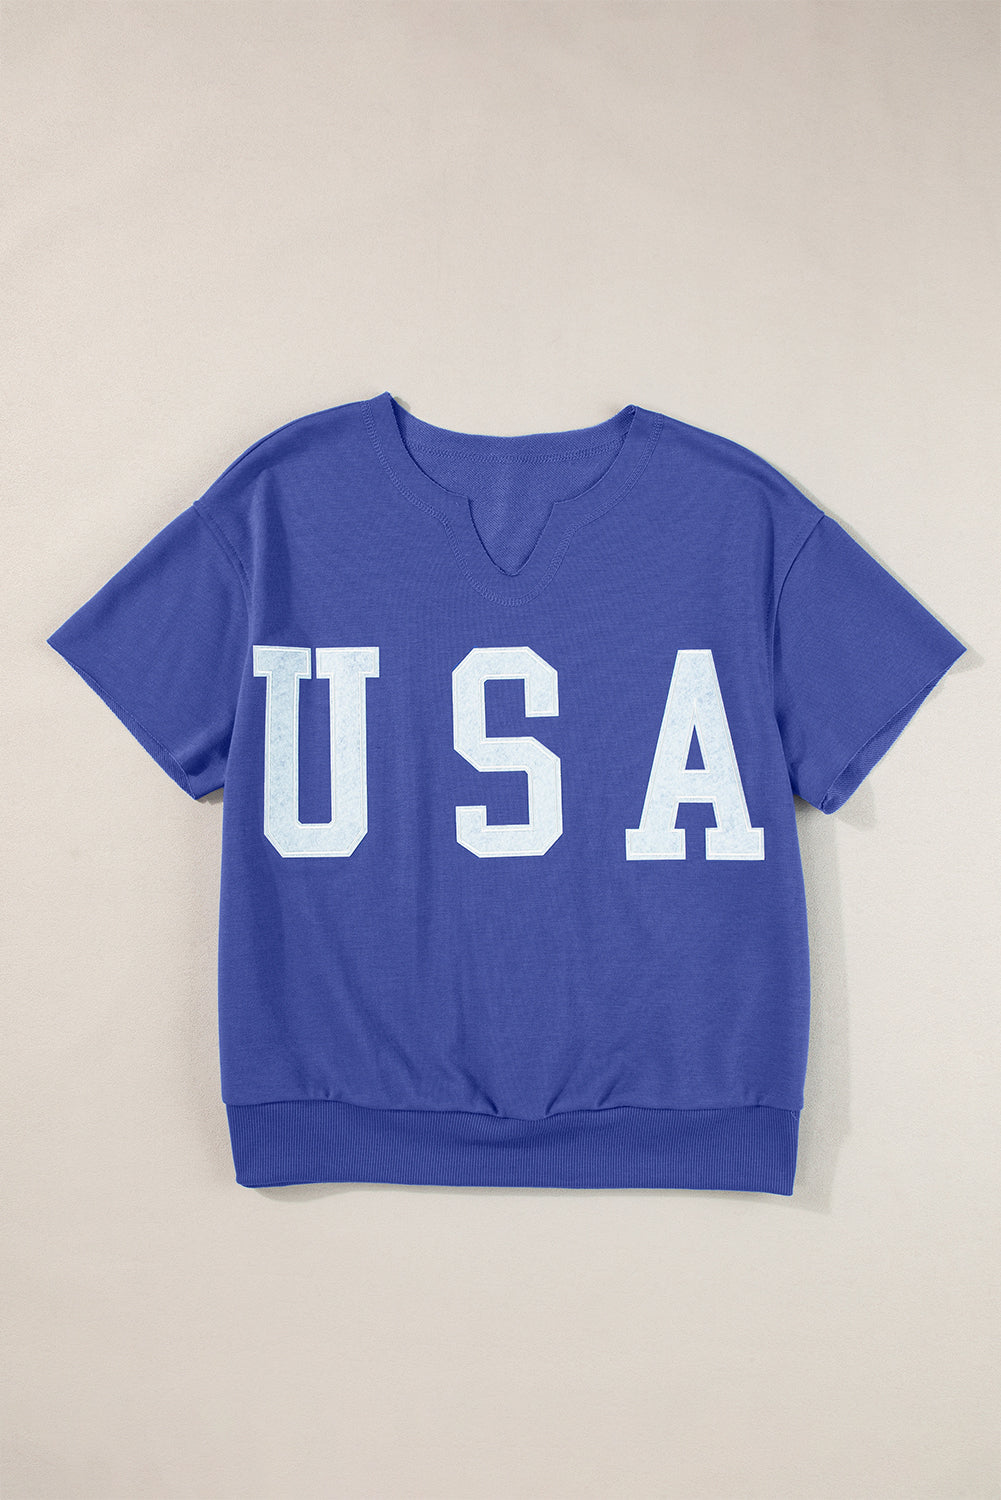 a t - shirt with the word usa printed on it